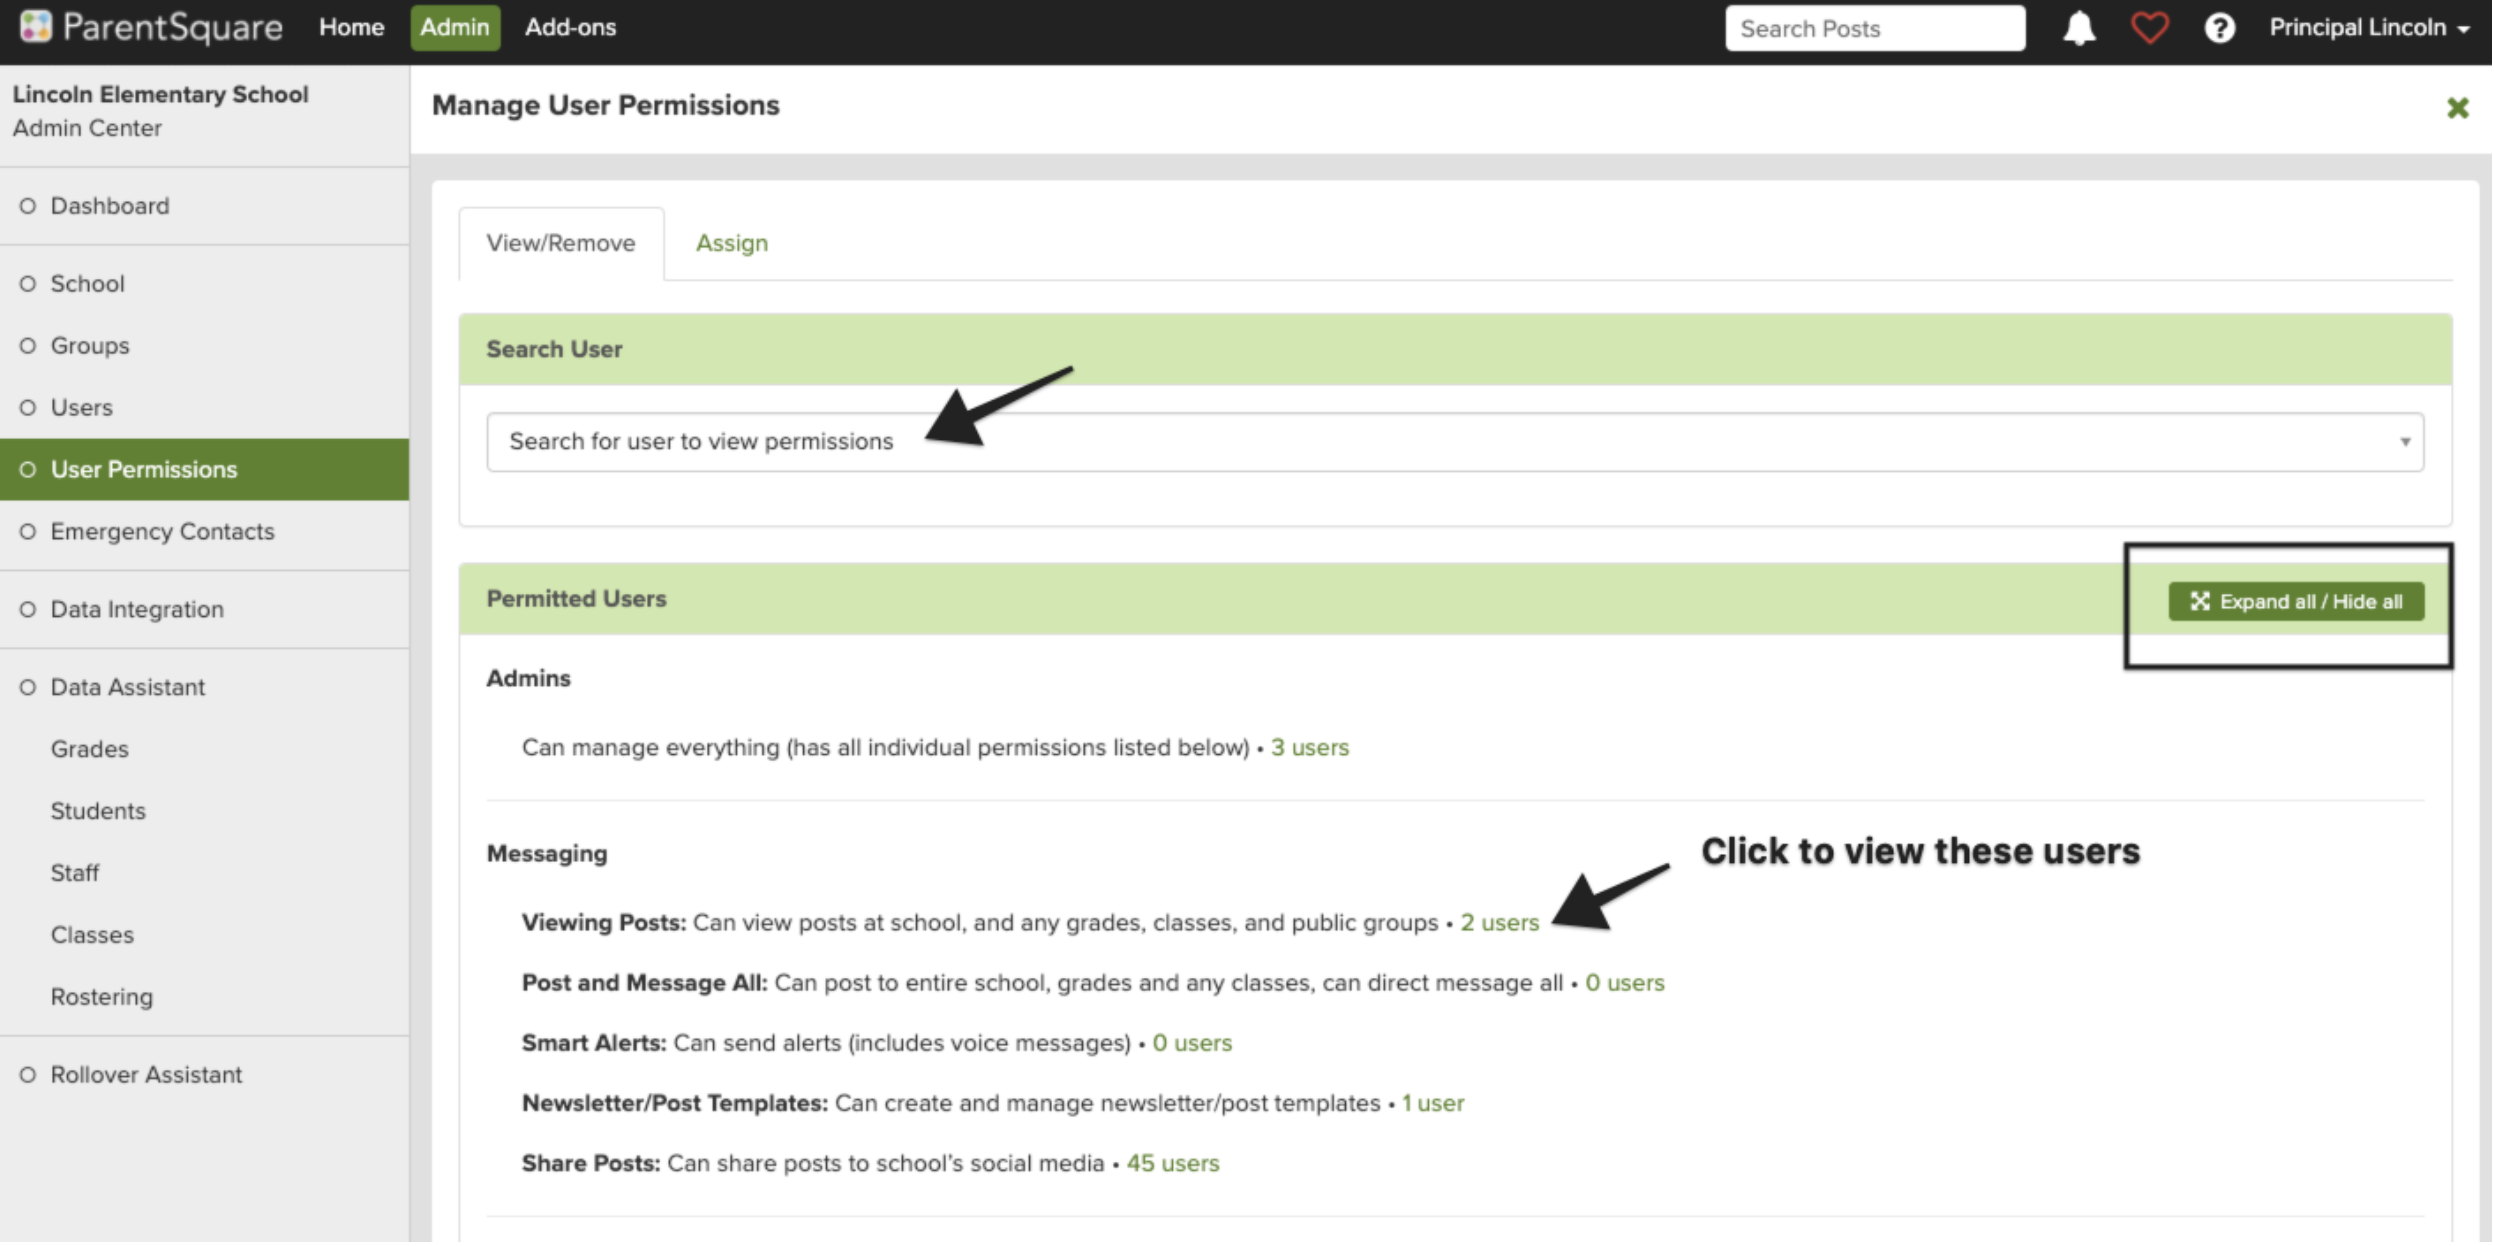 Screenshot of “View/Remove” User Permissions page in ParentSquare